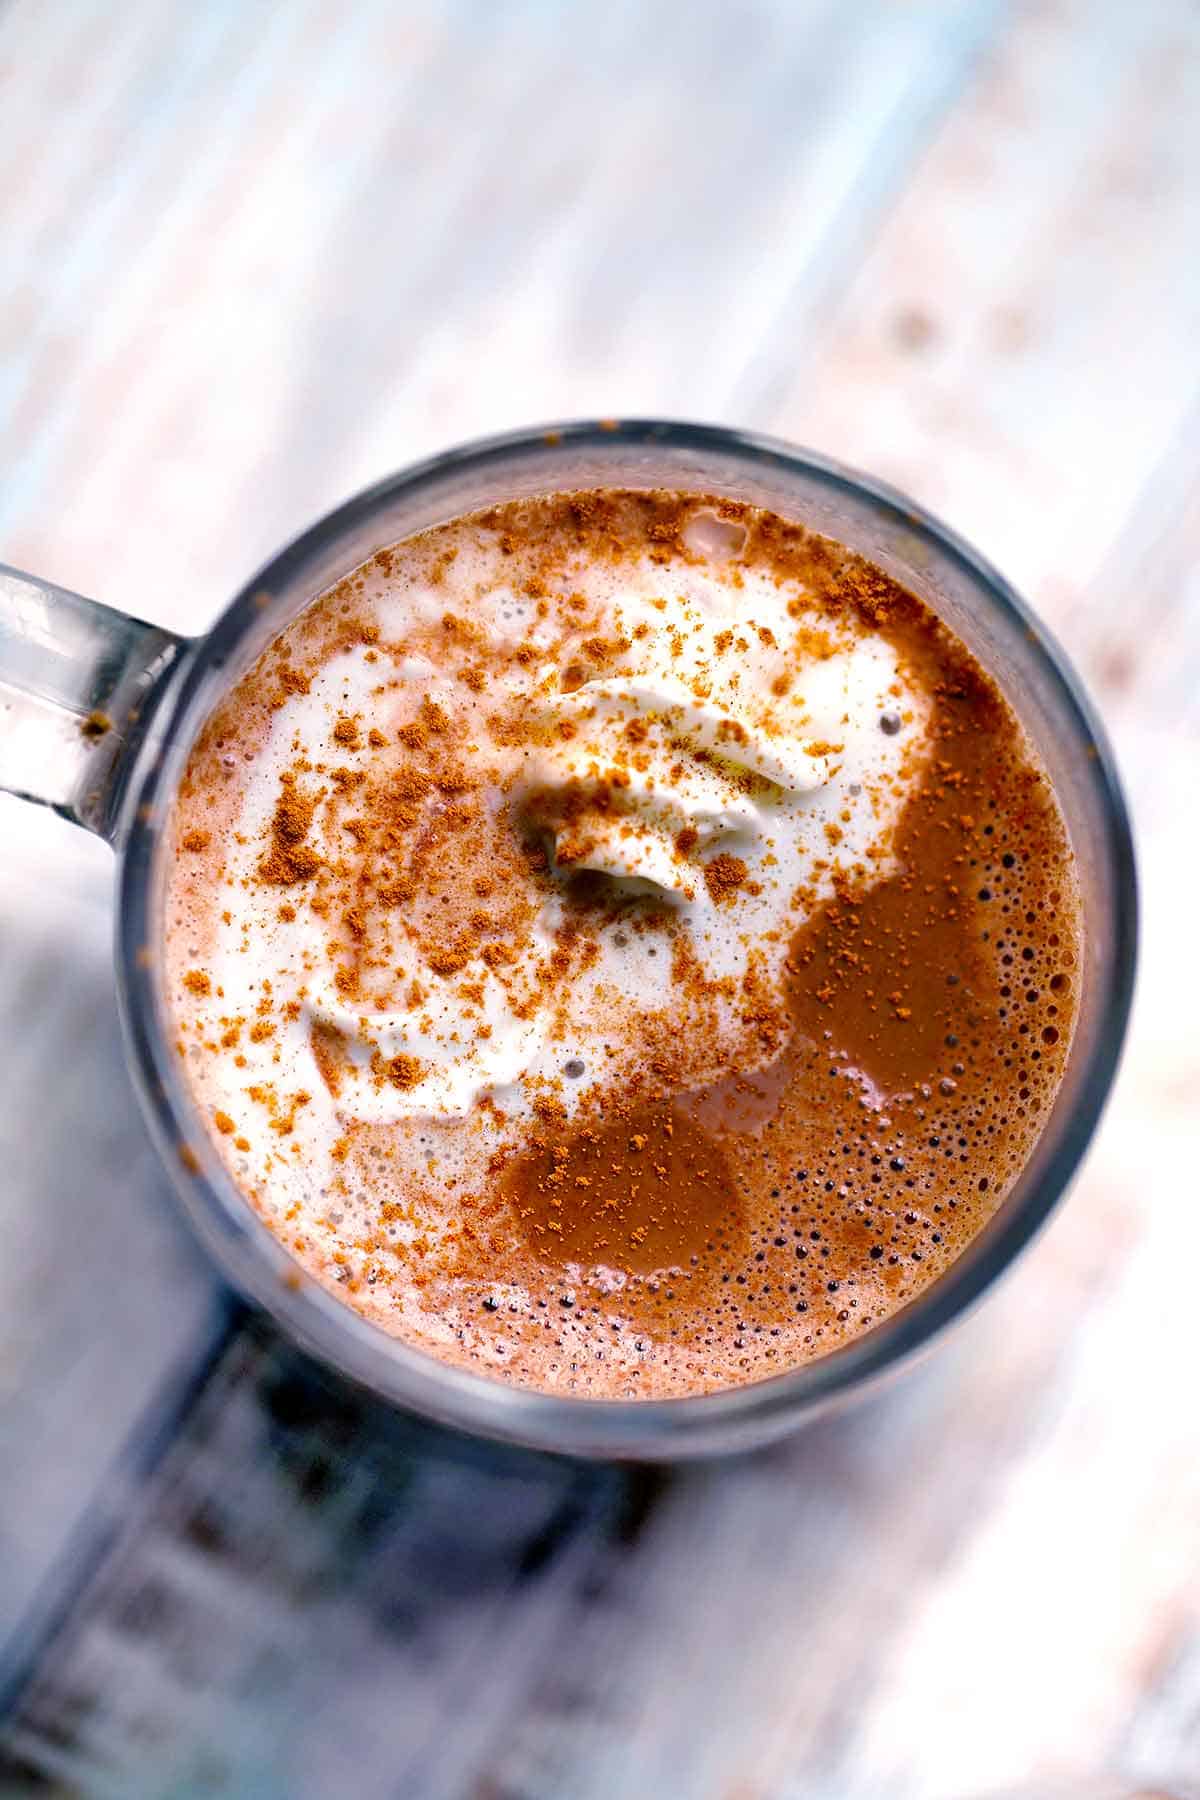 Overhead photo of a mug of spicy hot chocolate with whipped cream and cinnamon on top.